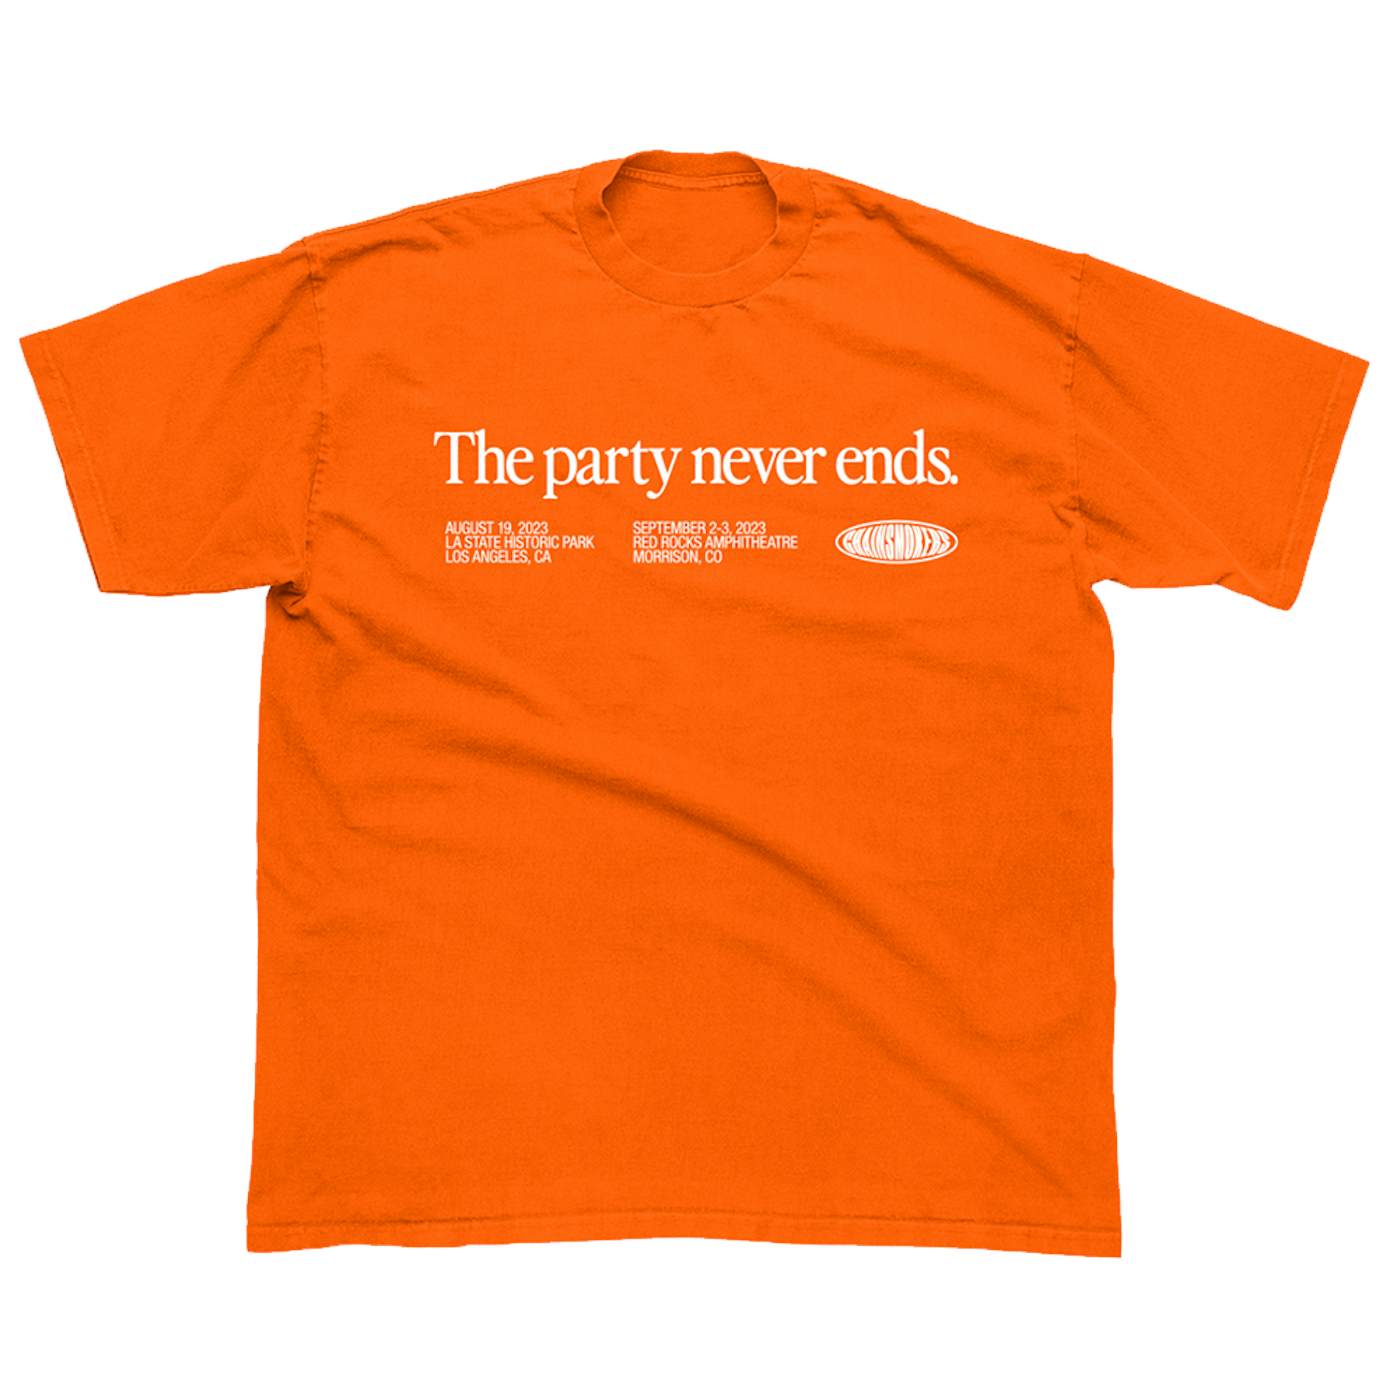 The Chainsmokers The Party Never Ends - Orange Tee